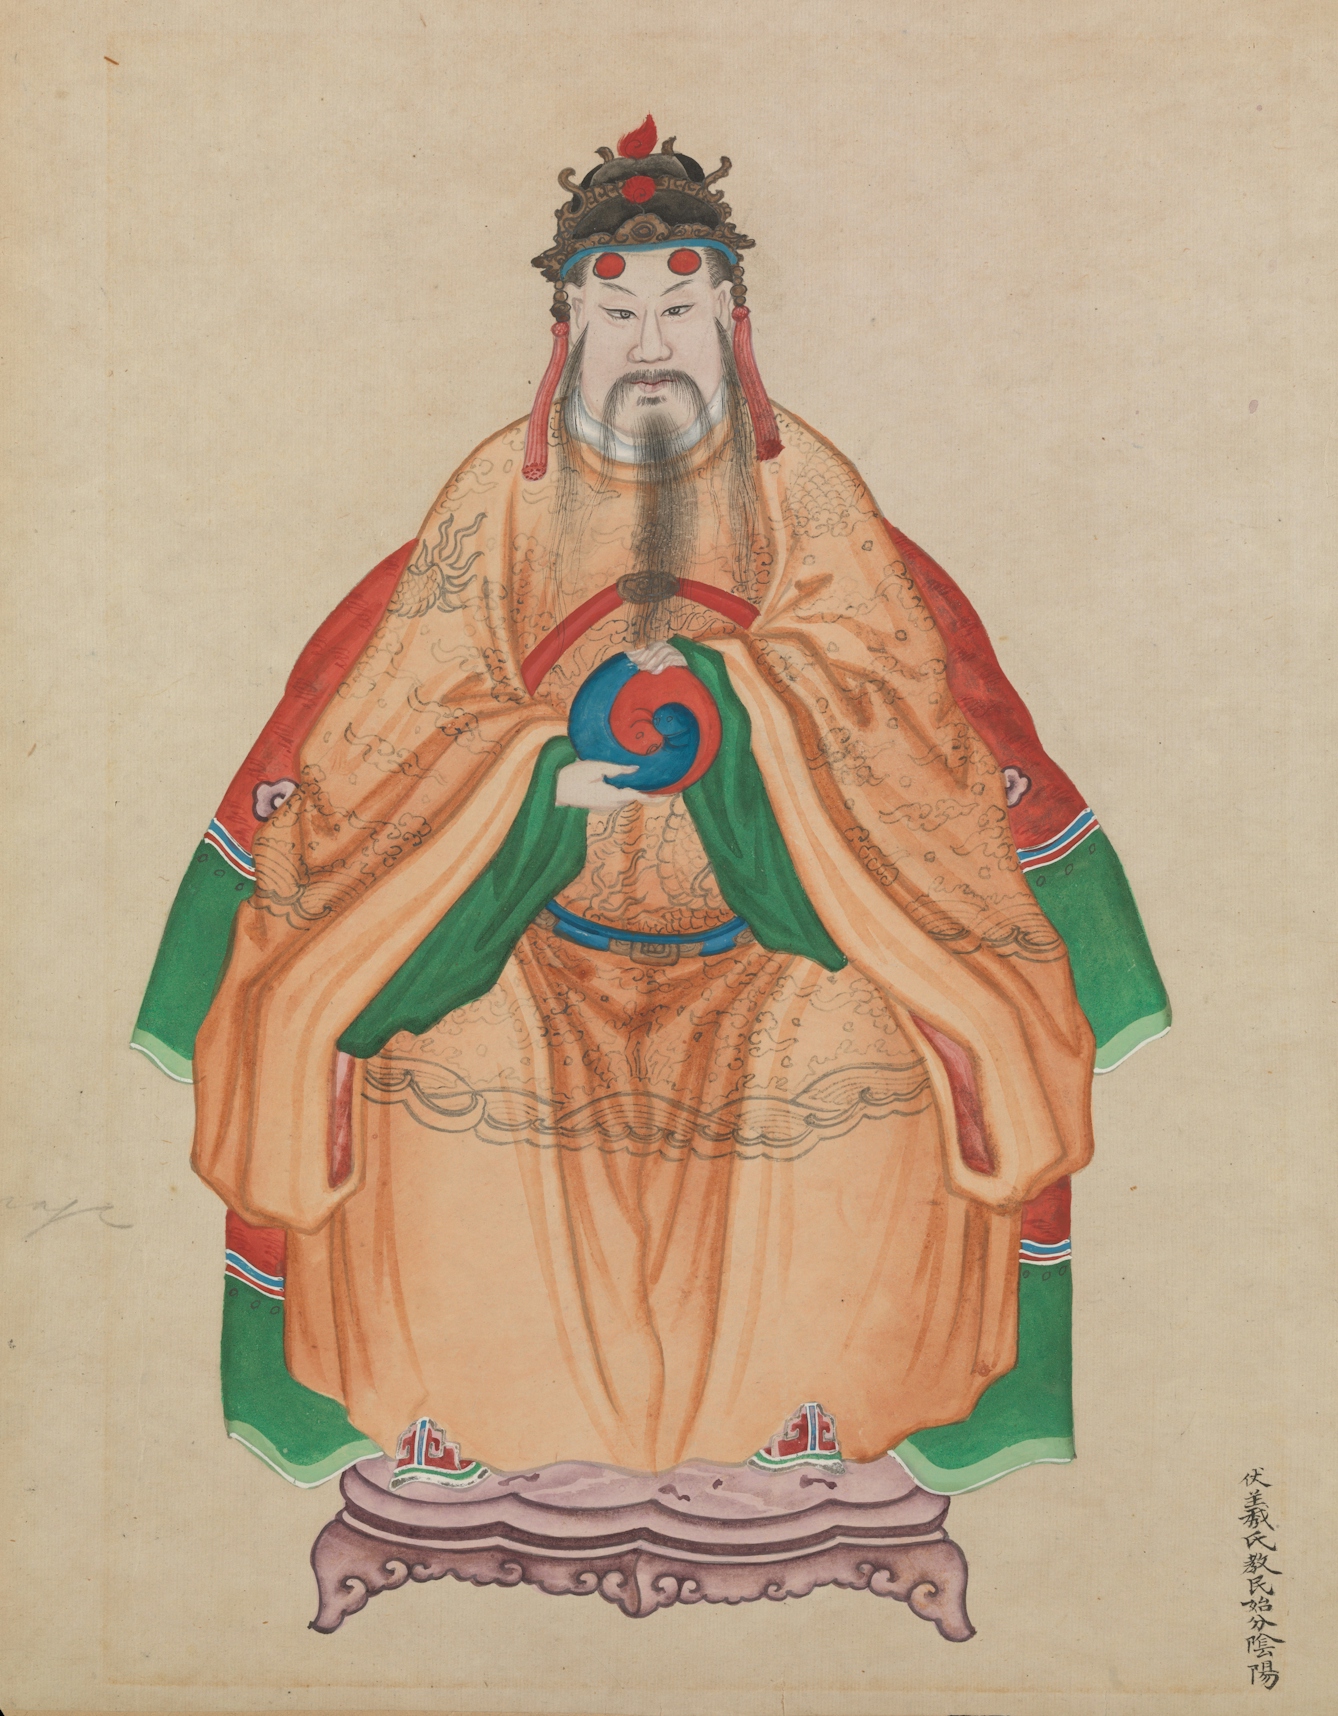 Painting of Chinese Emperor Fu Hsi, wearing traditional costume, holding the 'Yin-yang' symbol with feet resting on a cloud-shaped stool.